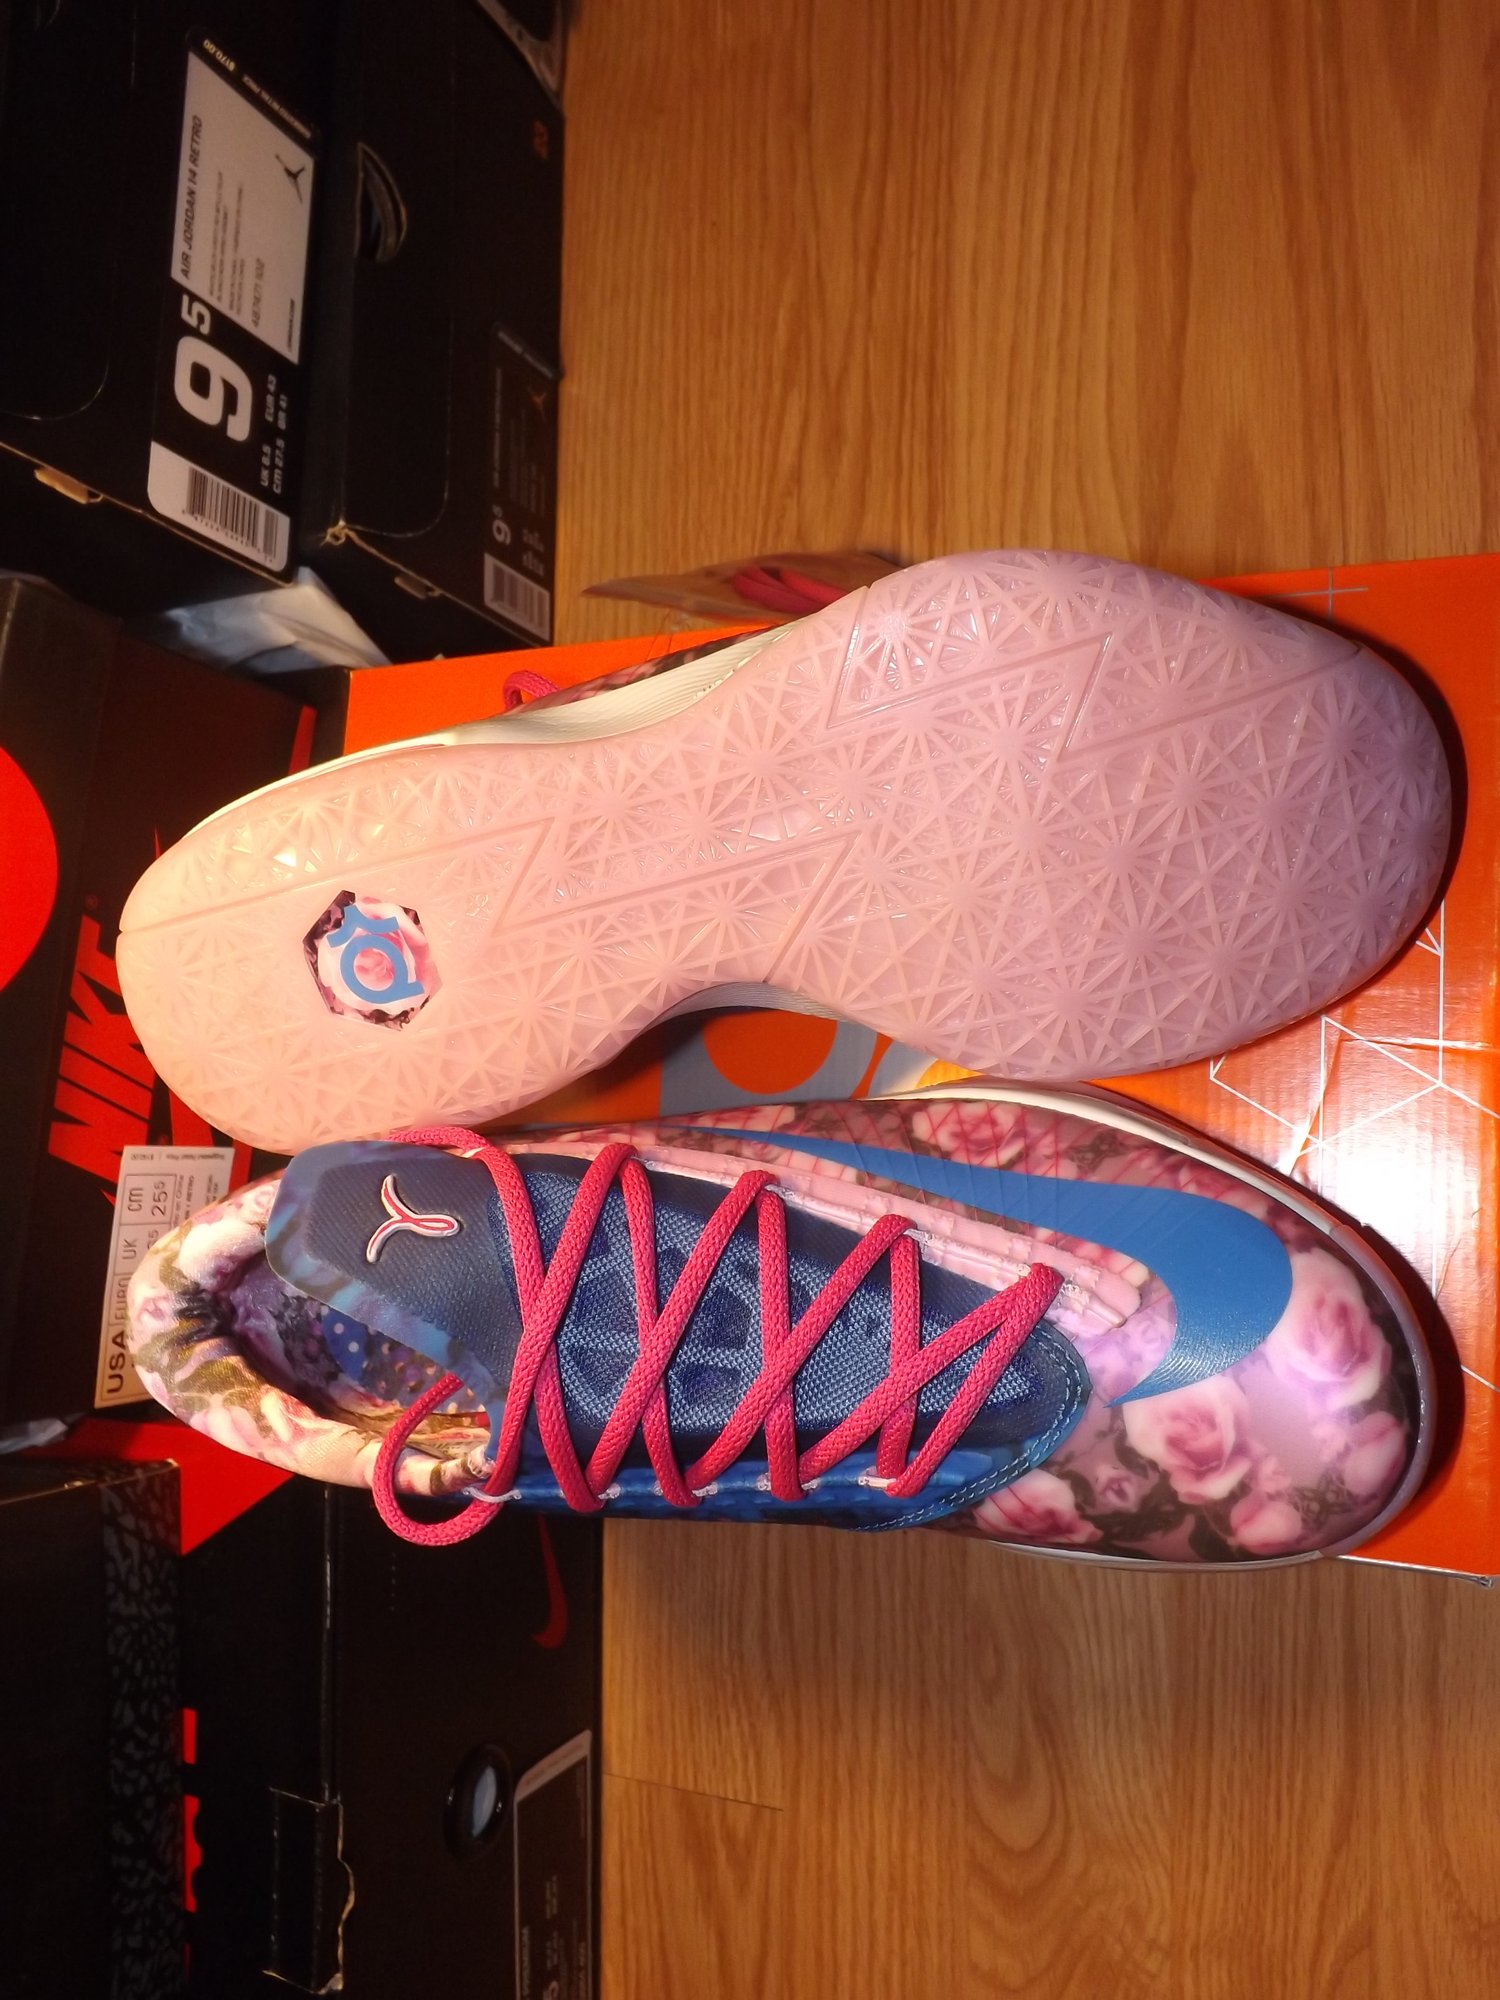 Image of KD 6 supreme "aunt pearl"